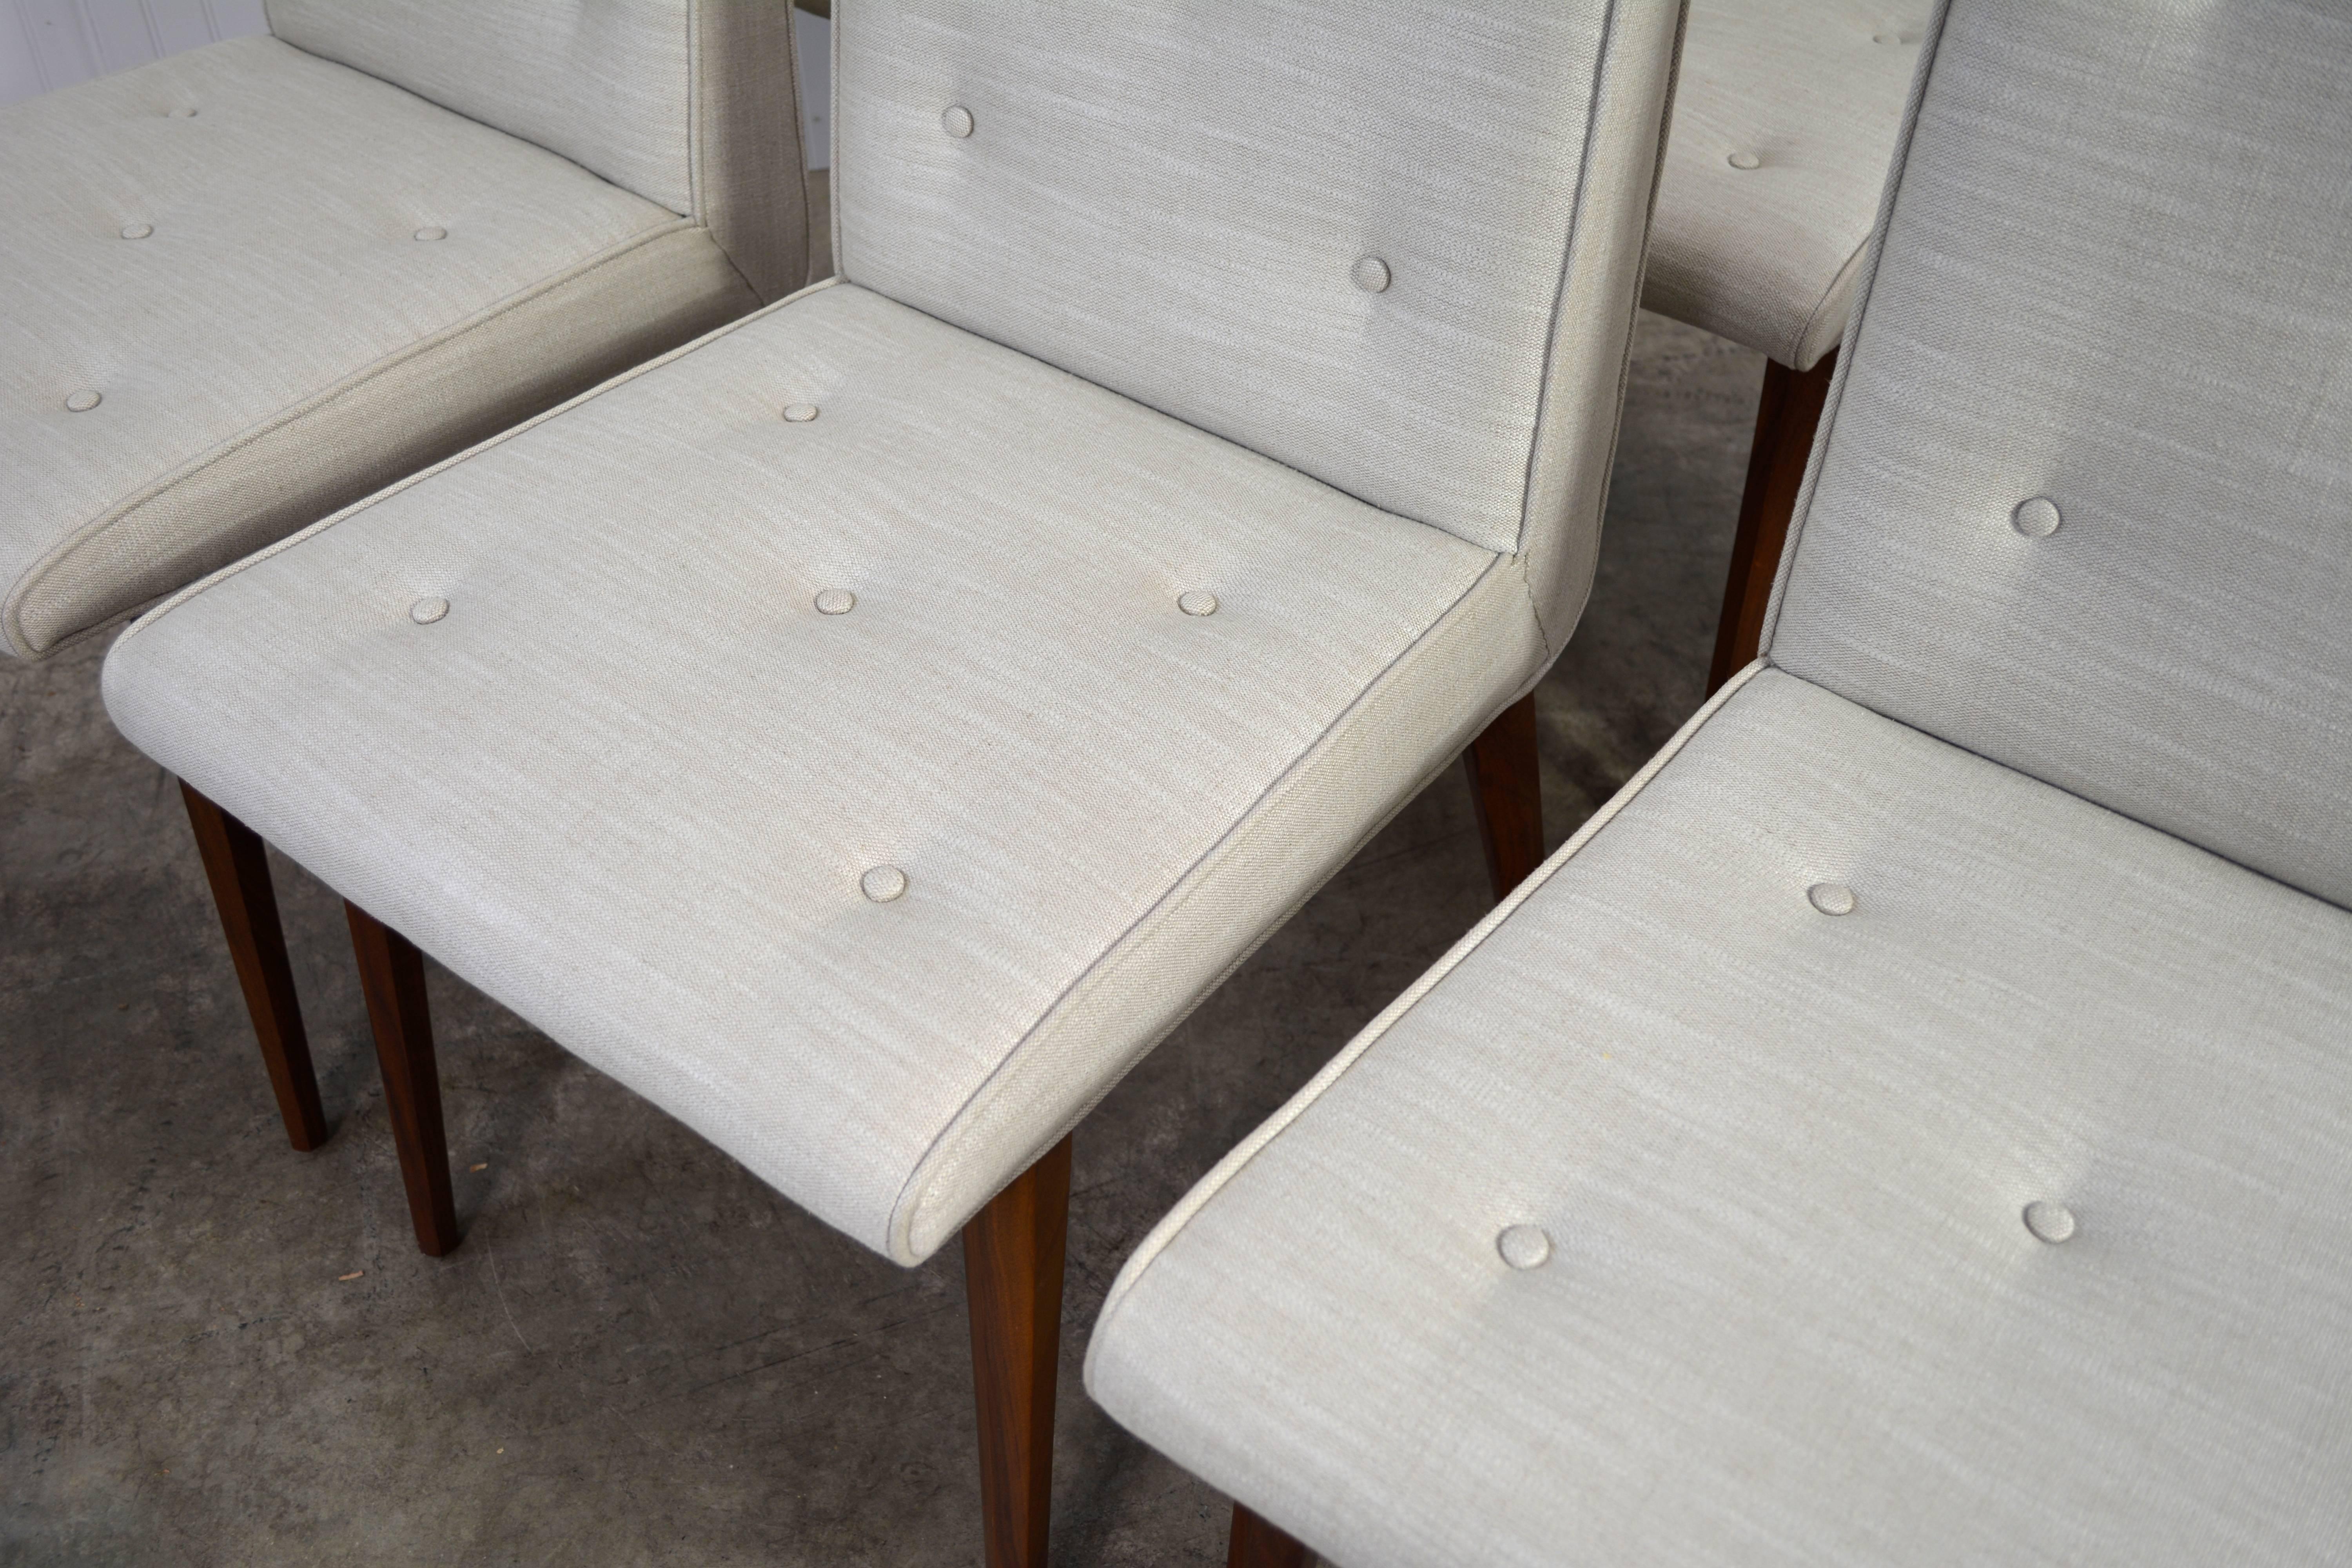 Set of six dining chairs designed by George Nakashima for Widdicomb. 

Newly refinished and recovered in Belgian linen. All pieces labeled. Measure seat height 18.5